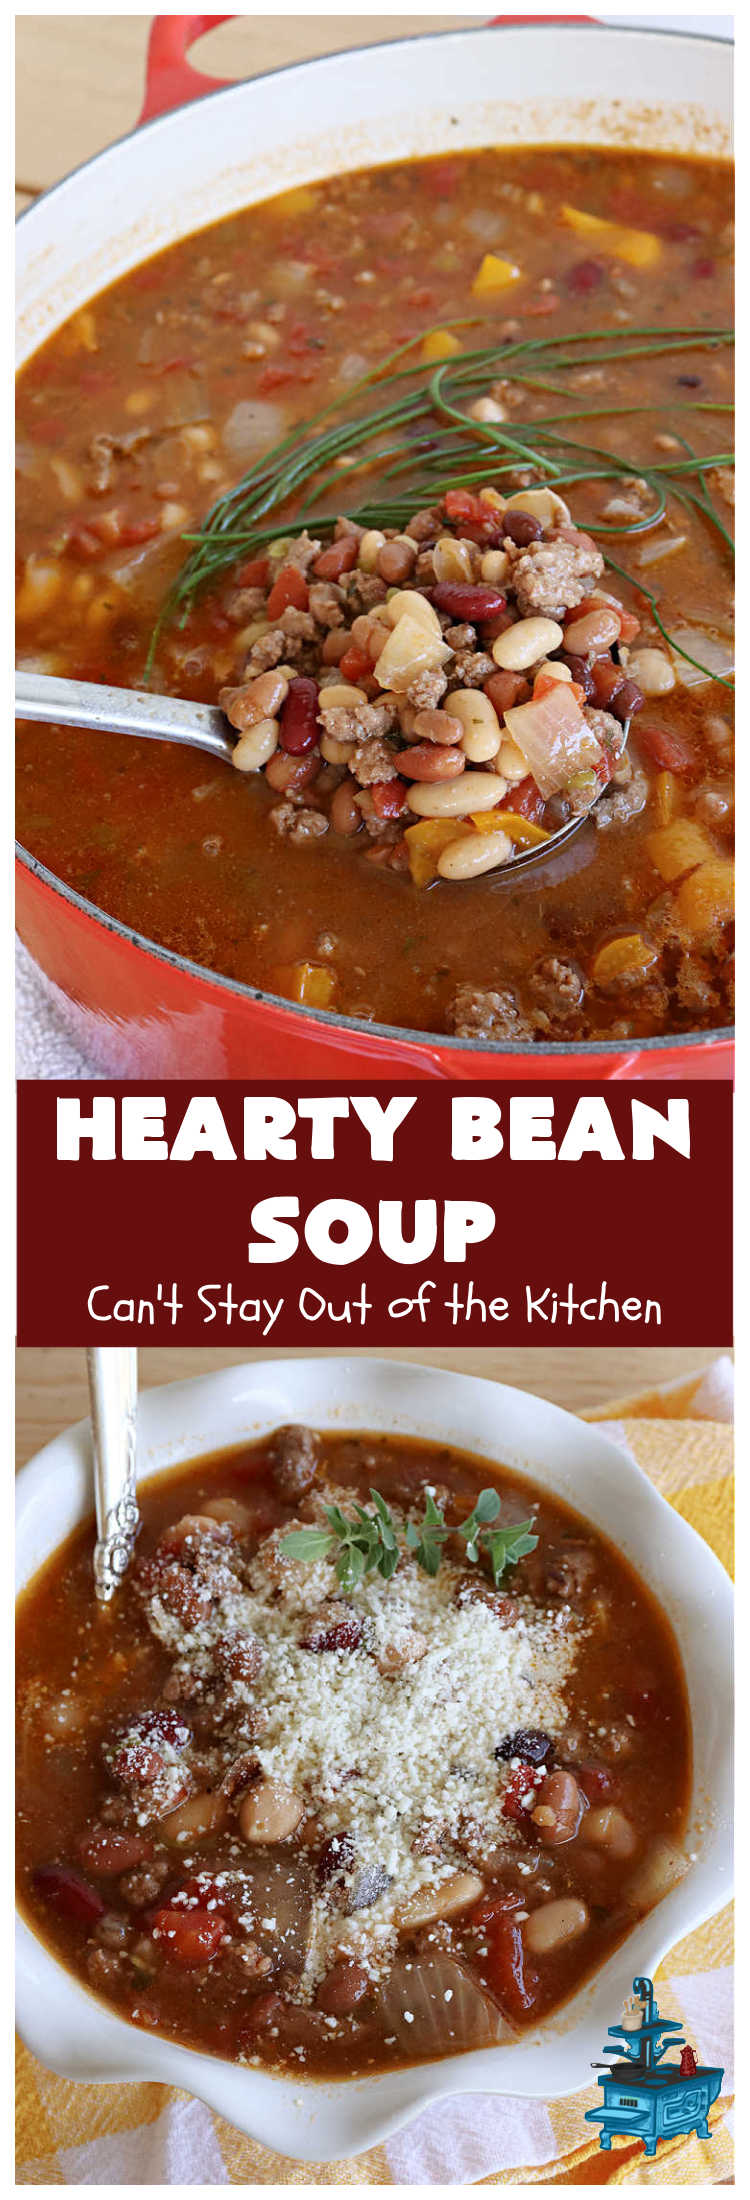 Hearty Bean Soup | Can't Stay Out of the Kitchen | This scrumptious #soup is chocked full of 8 different kinds of #beans. It's hearty & delicious & makes enough to serve a crowd. Great for #tailgating parties. #HeartyBeanSoup 